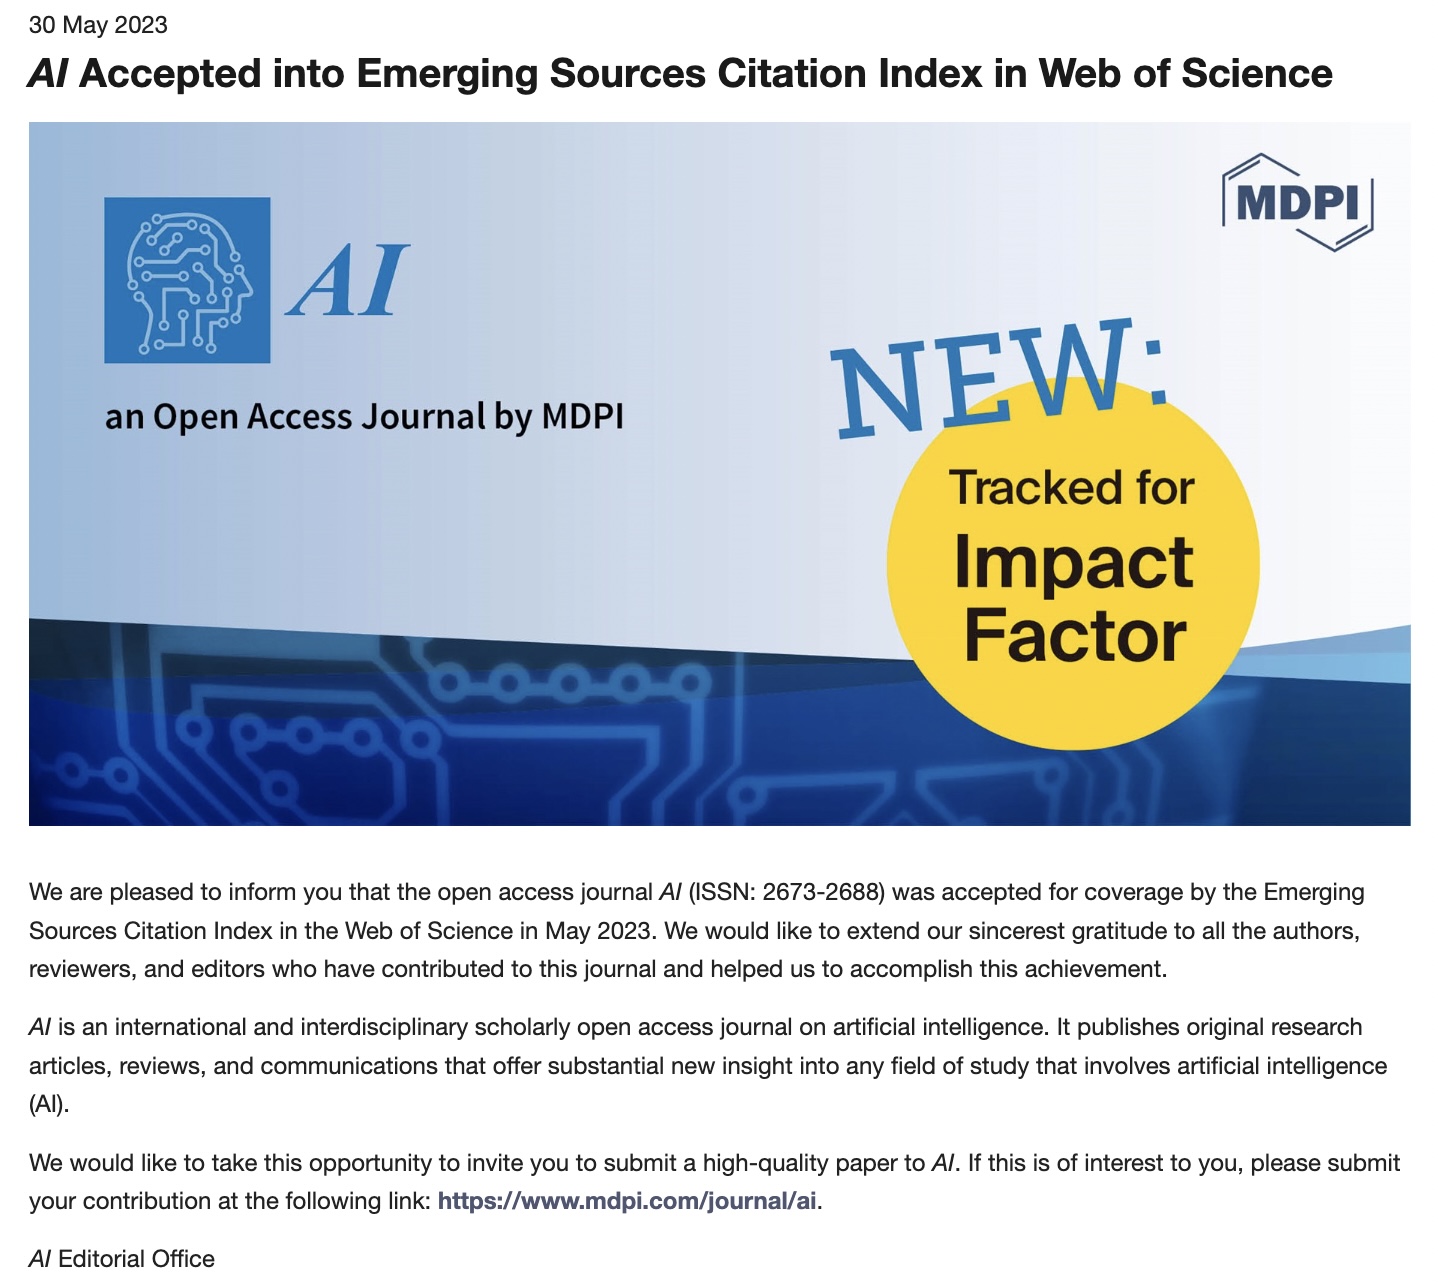 Journal “AI” has been accepted into the Emerging Sources Citation Index in Web of Science